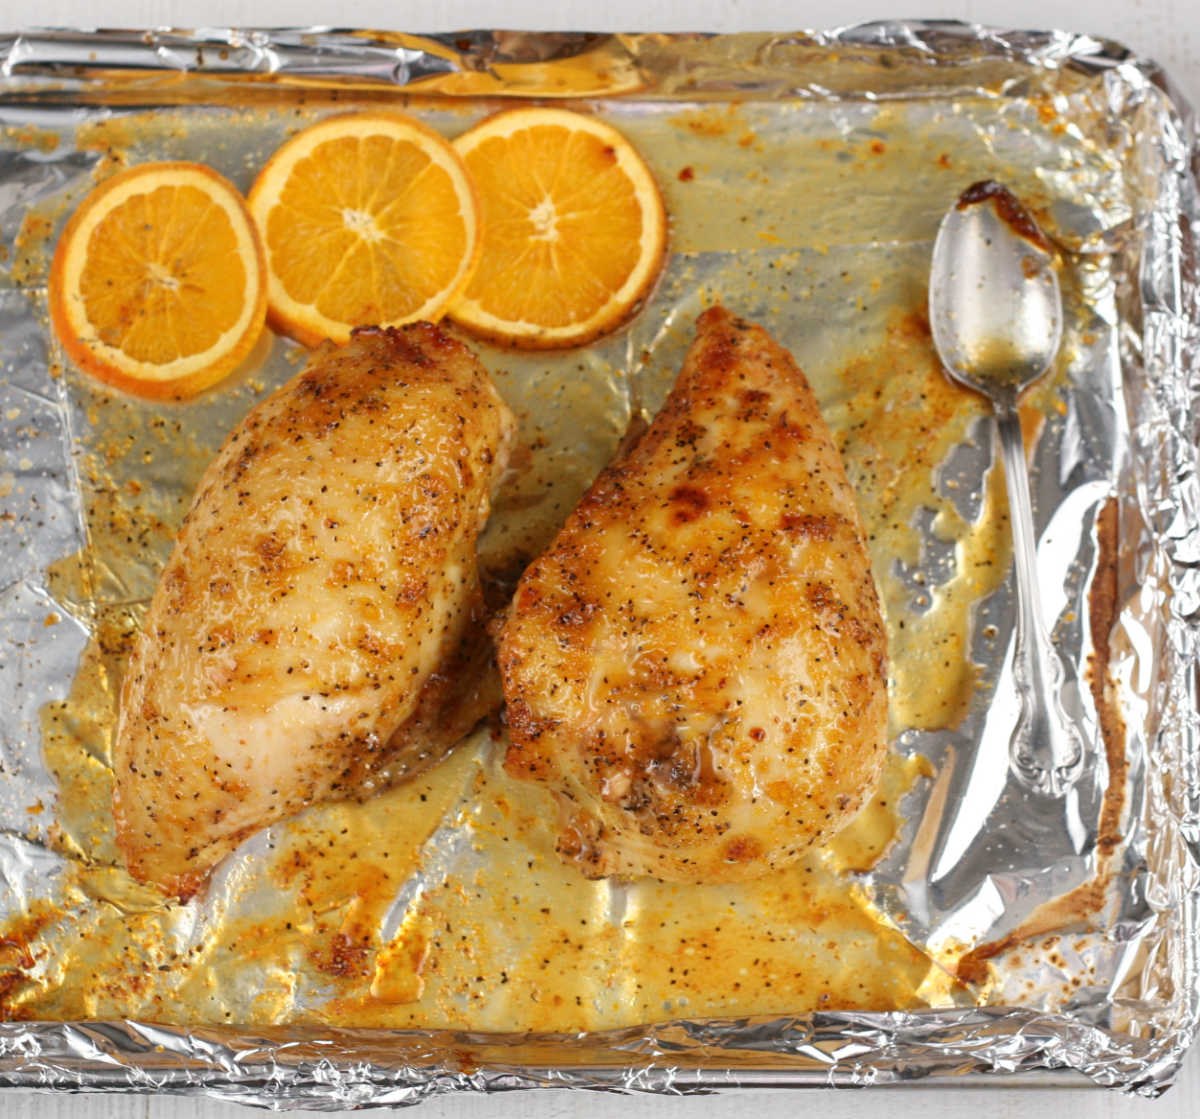 Orange glazed chicken on a half sheet pan lined with aluminum foil and orange slices.